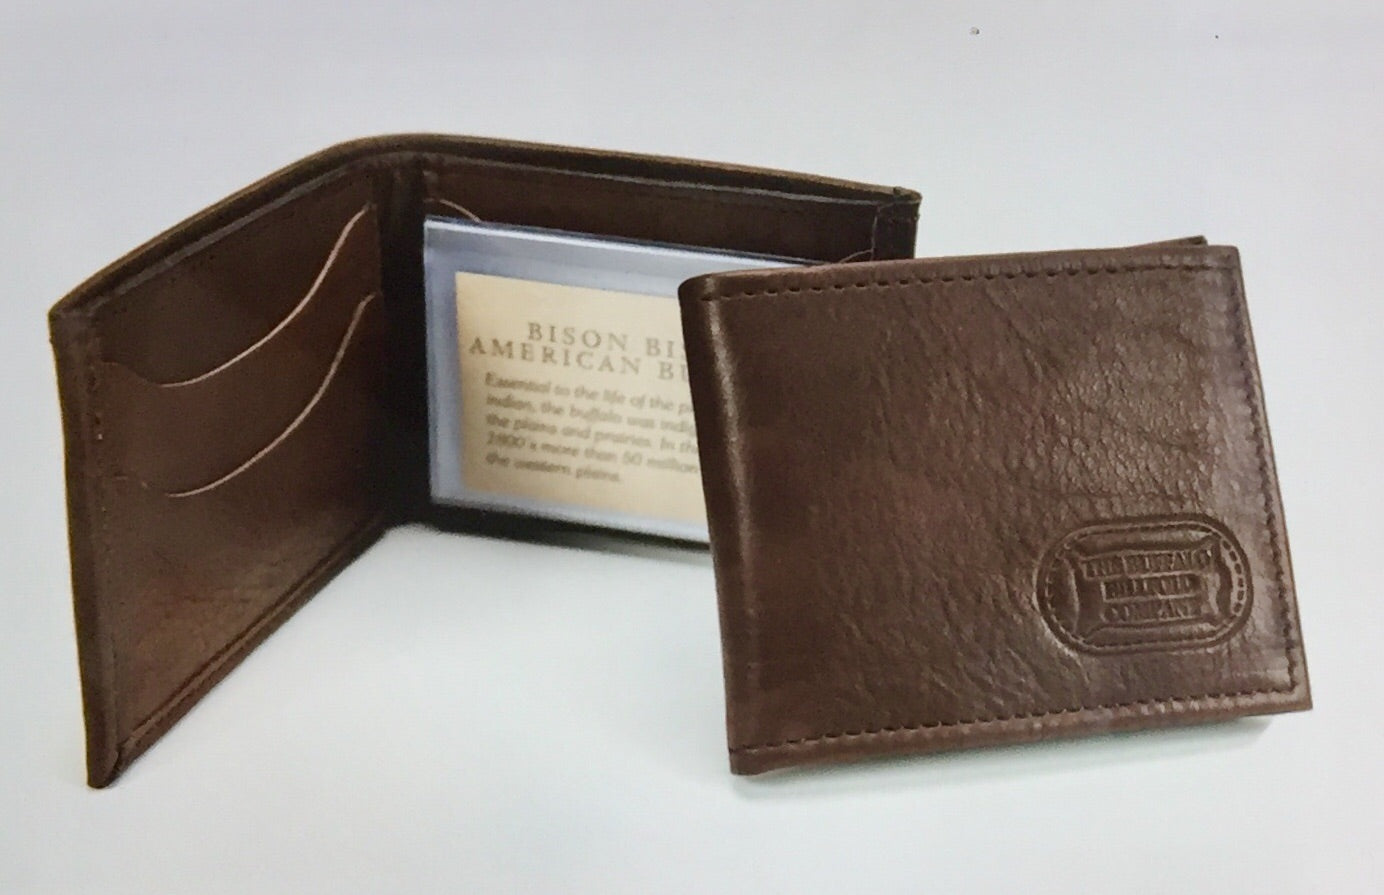 Best Selling Leather Goods Sample Pack – Buffalo Billfold Company